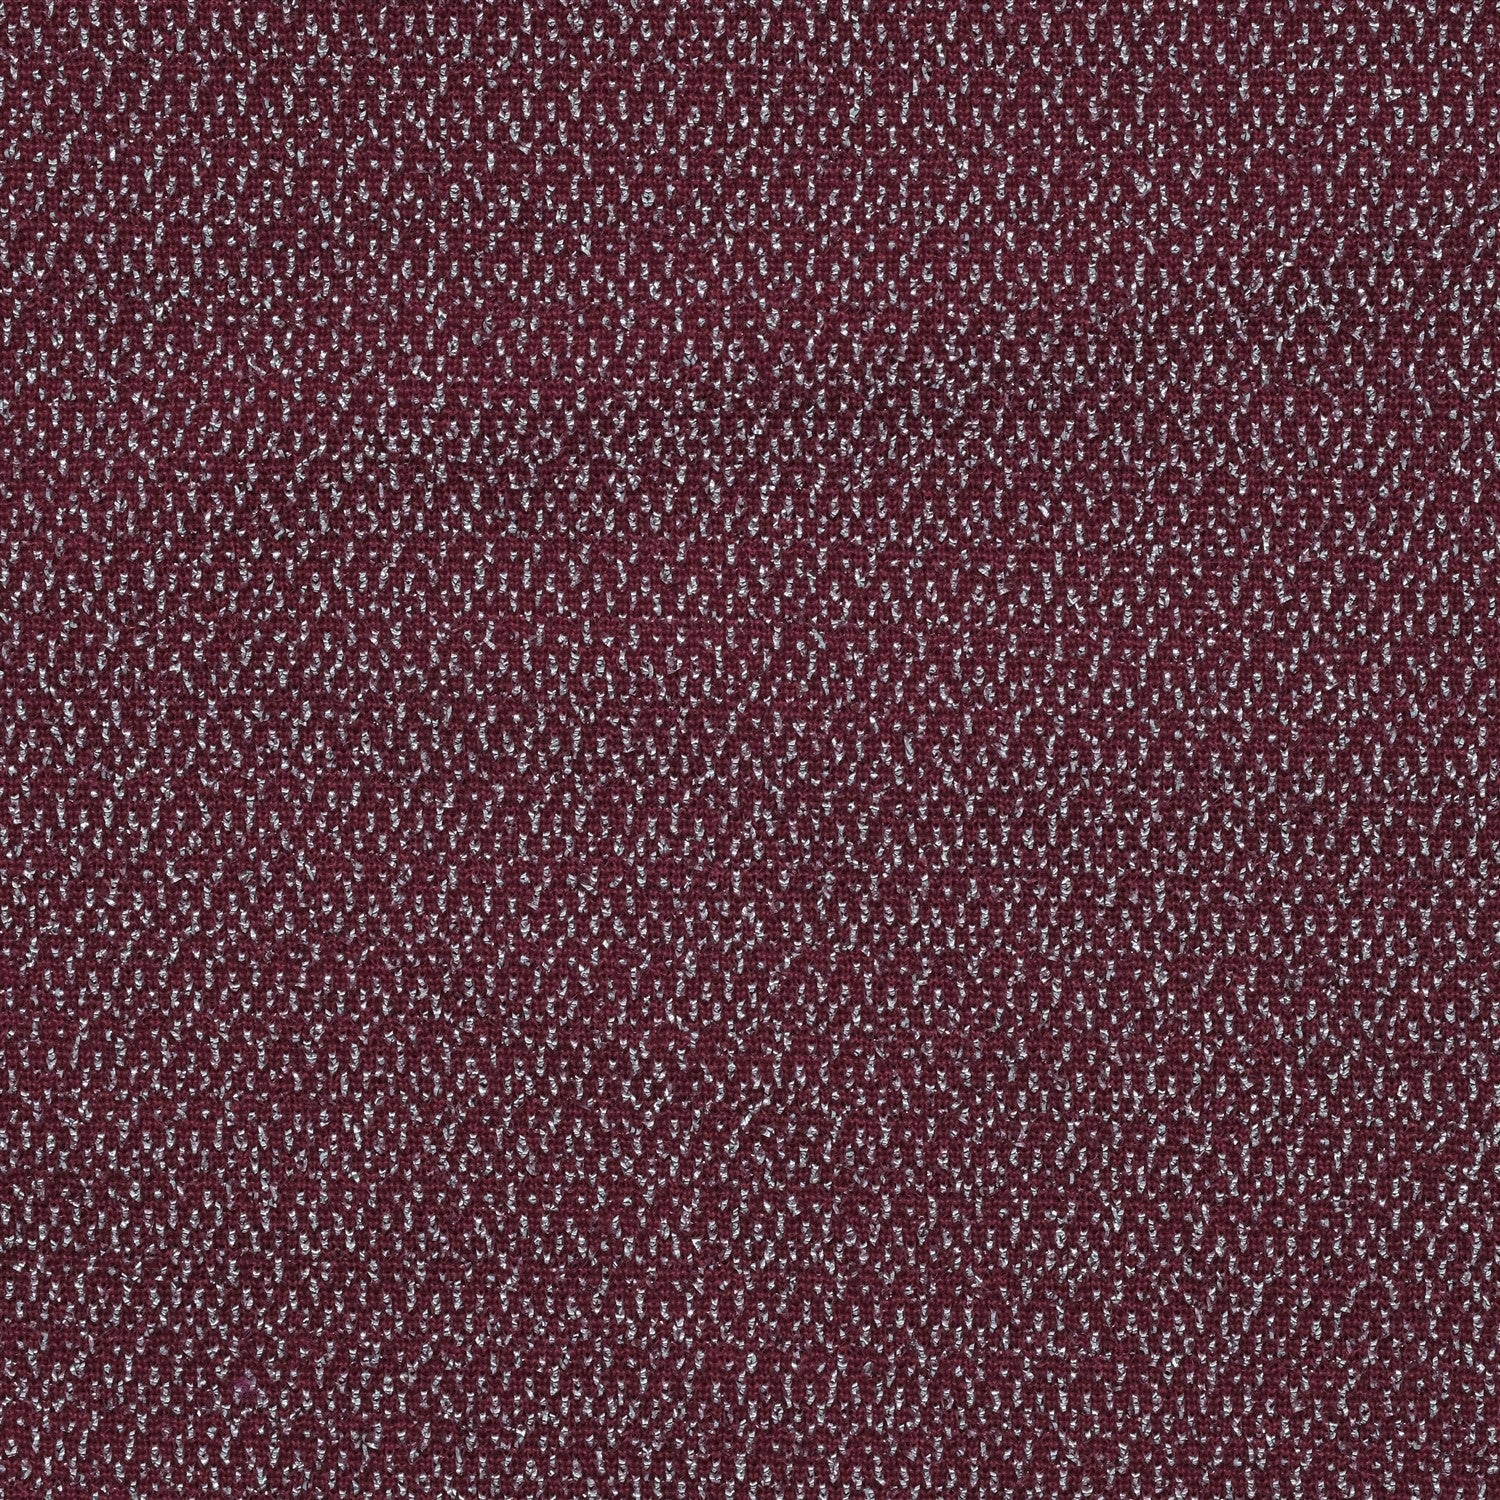 Shimmering Shiny Lurex Flexible Knitted Fabric